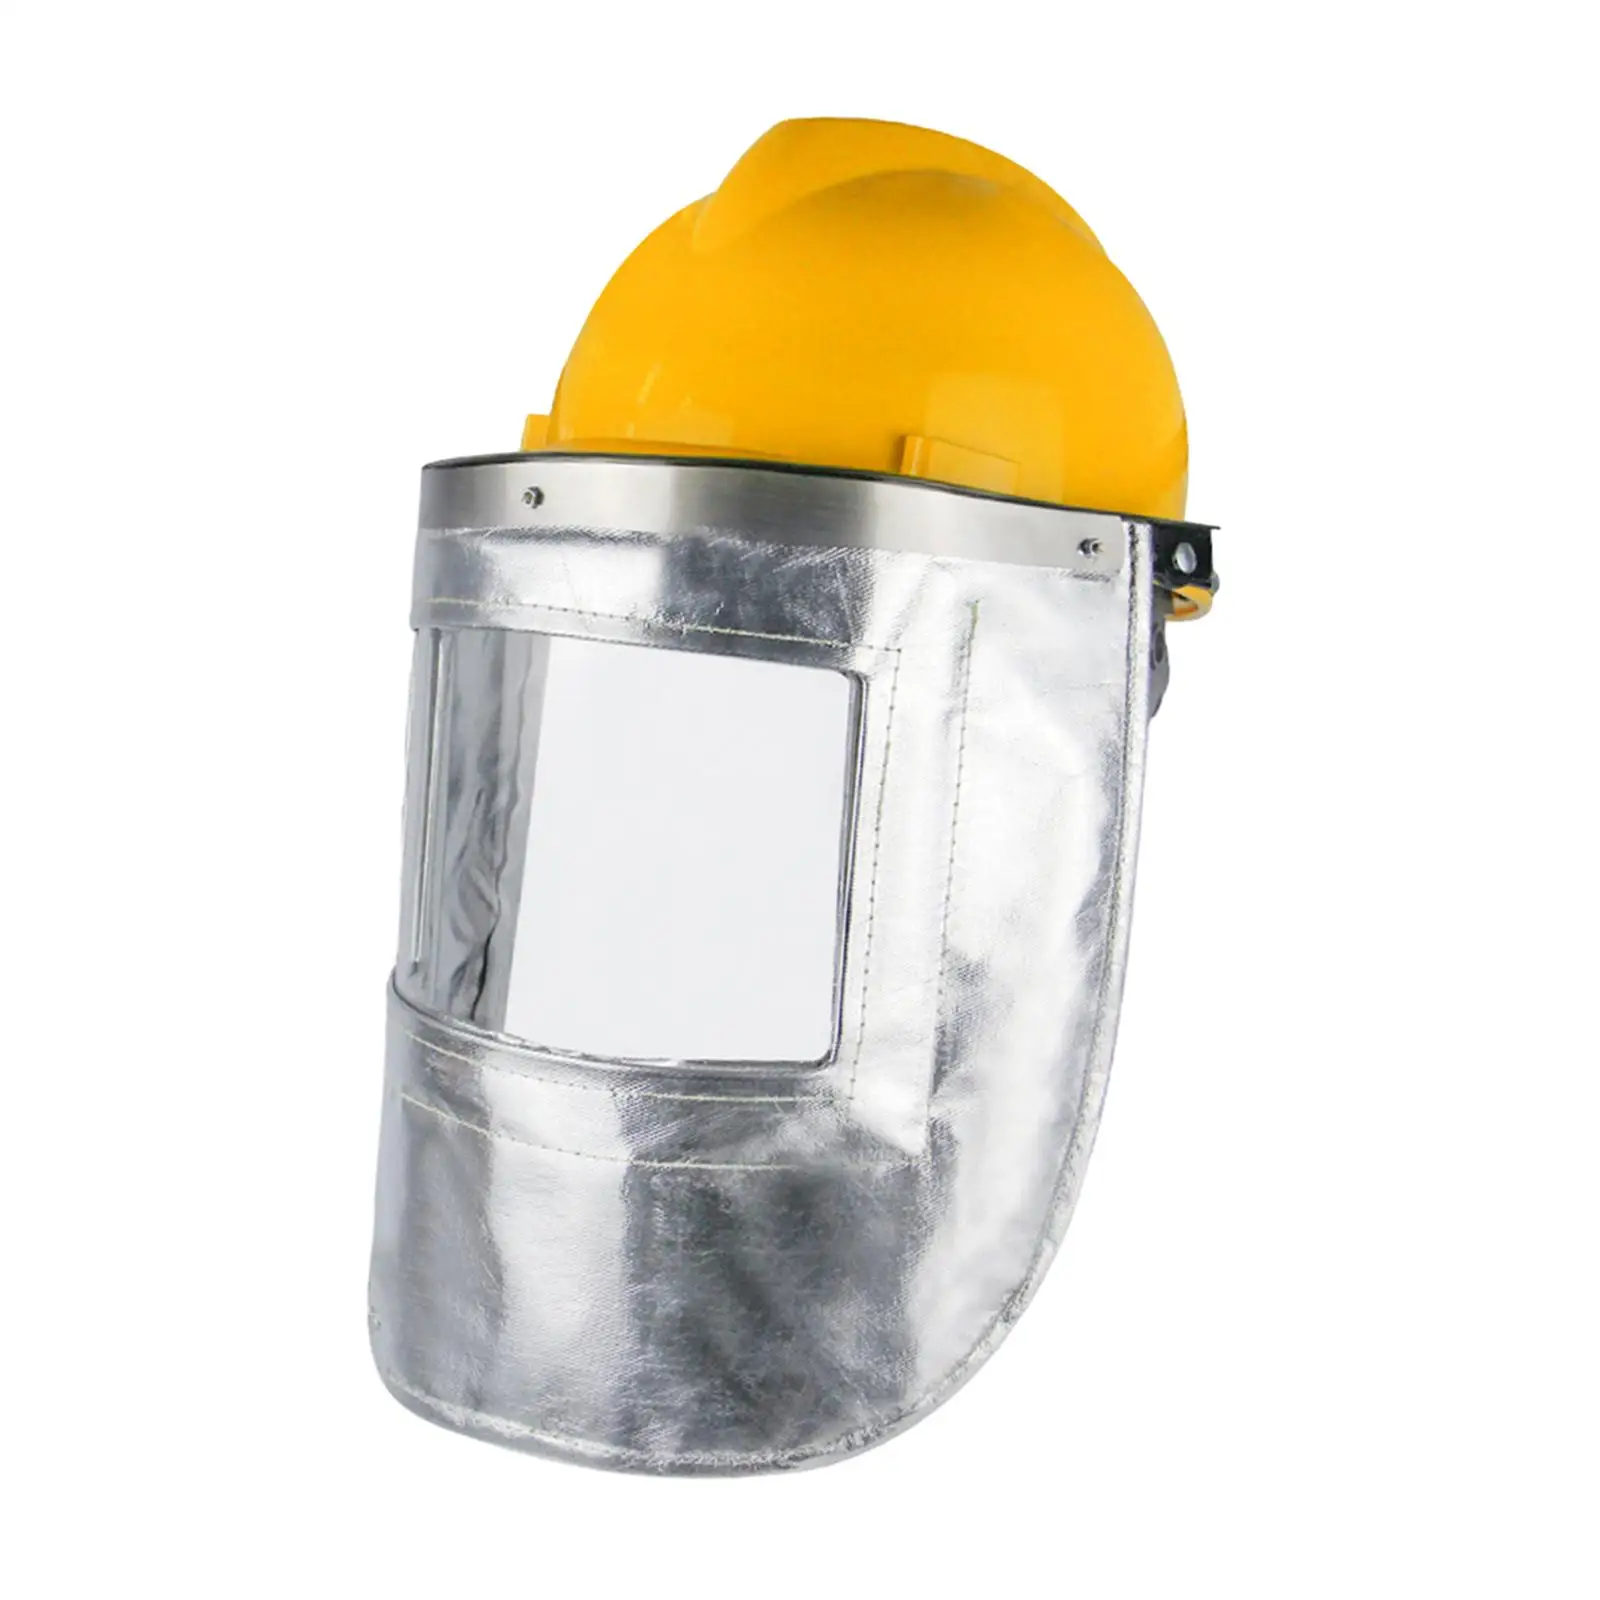 Welding Mask Hood Welder Face Cover Versatile Face Protector Anti Splash for Chainsaw, Forestry Gardening Sturdy Accessory